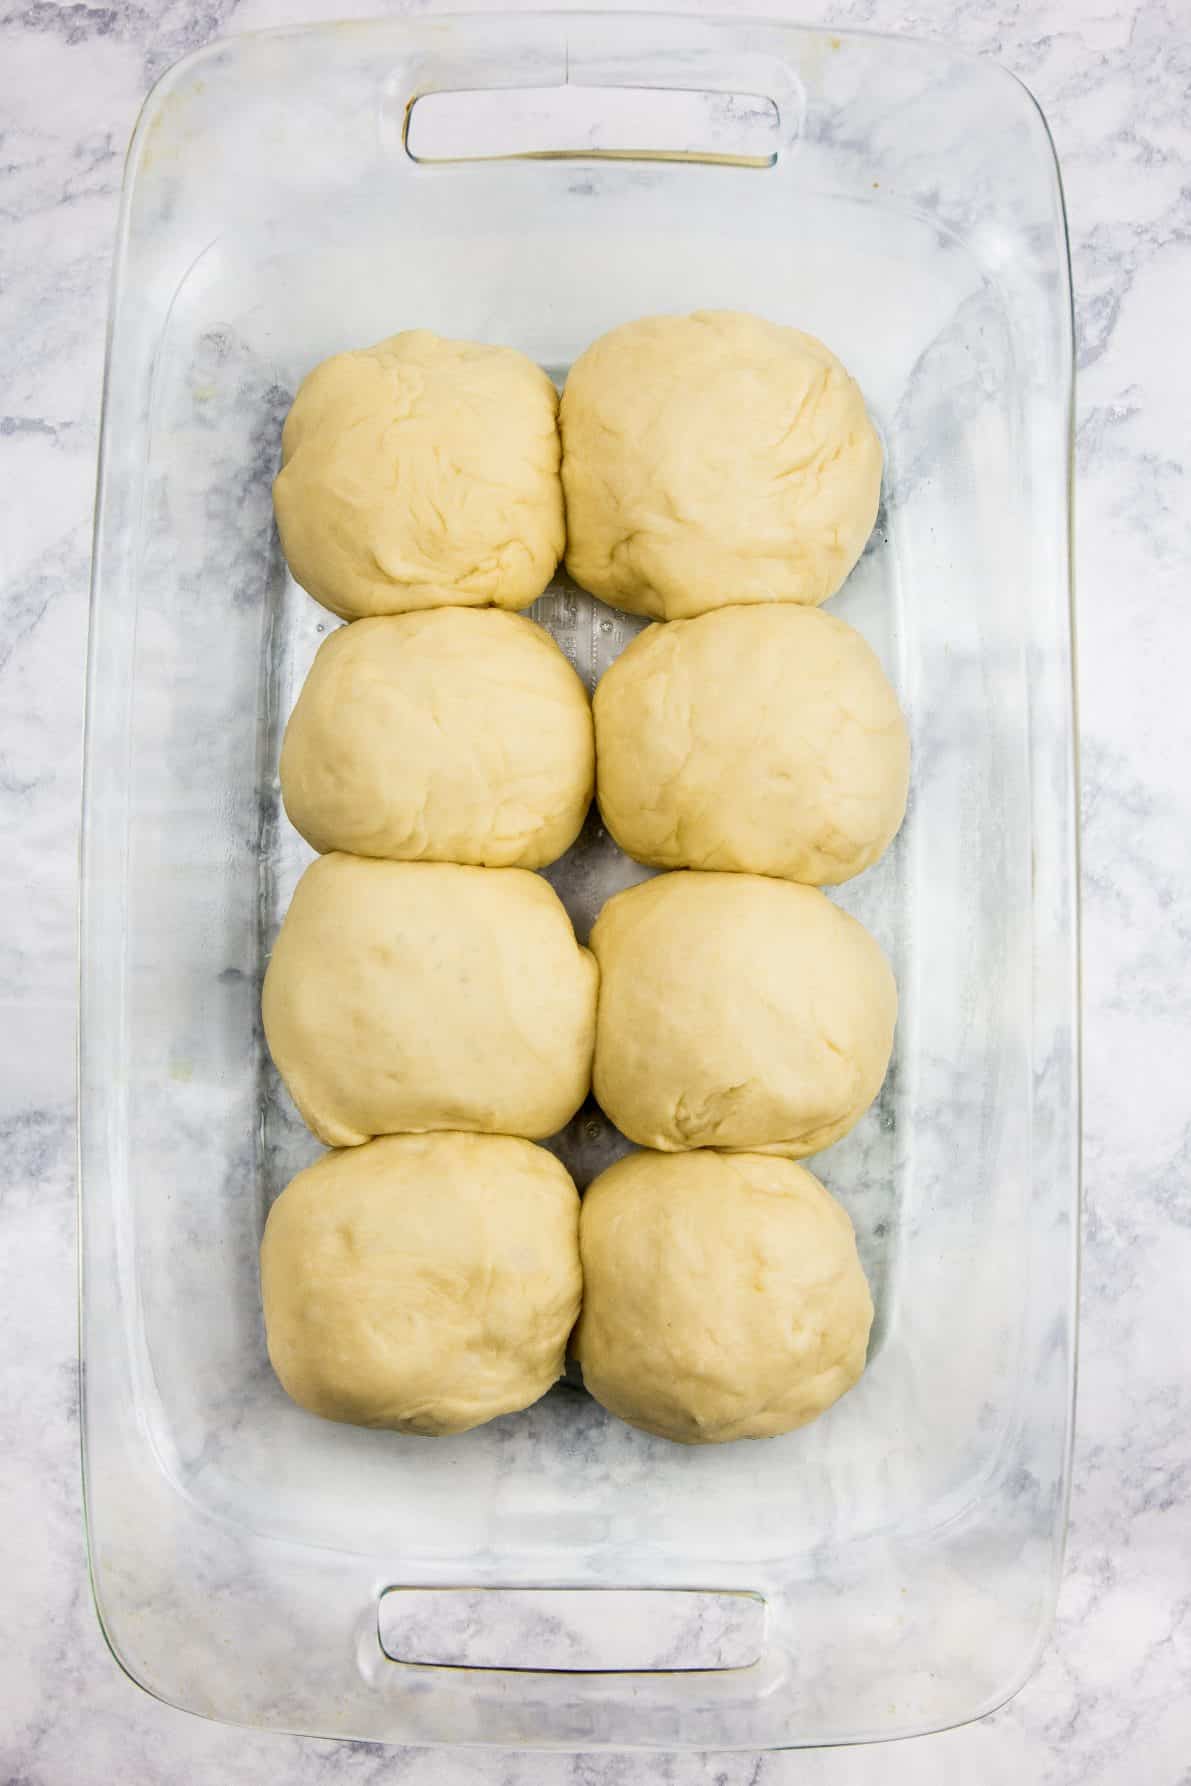 Milk bread rolls in a glass pan prior to baking.